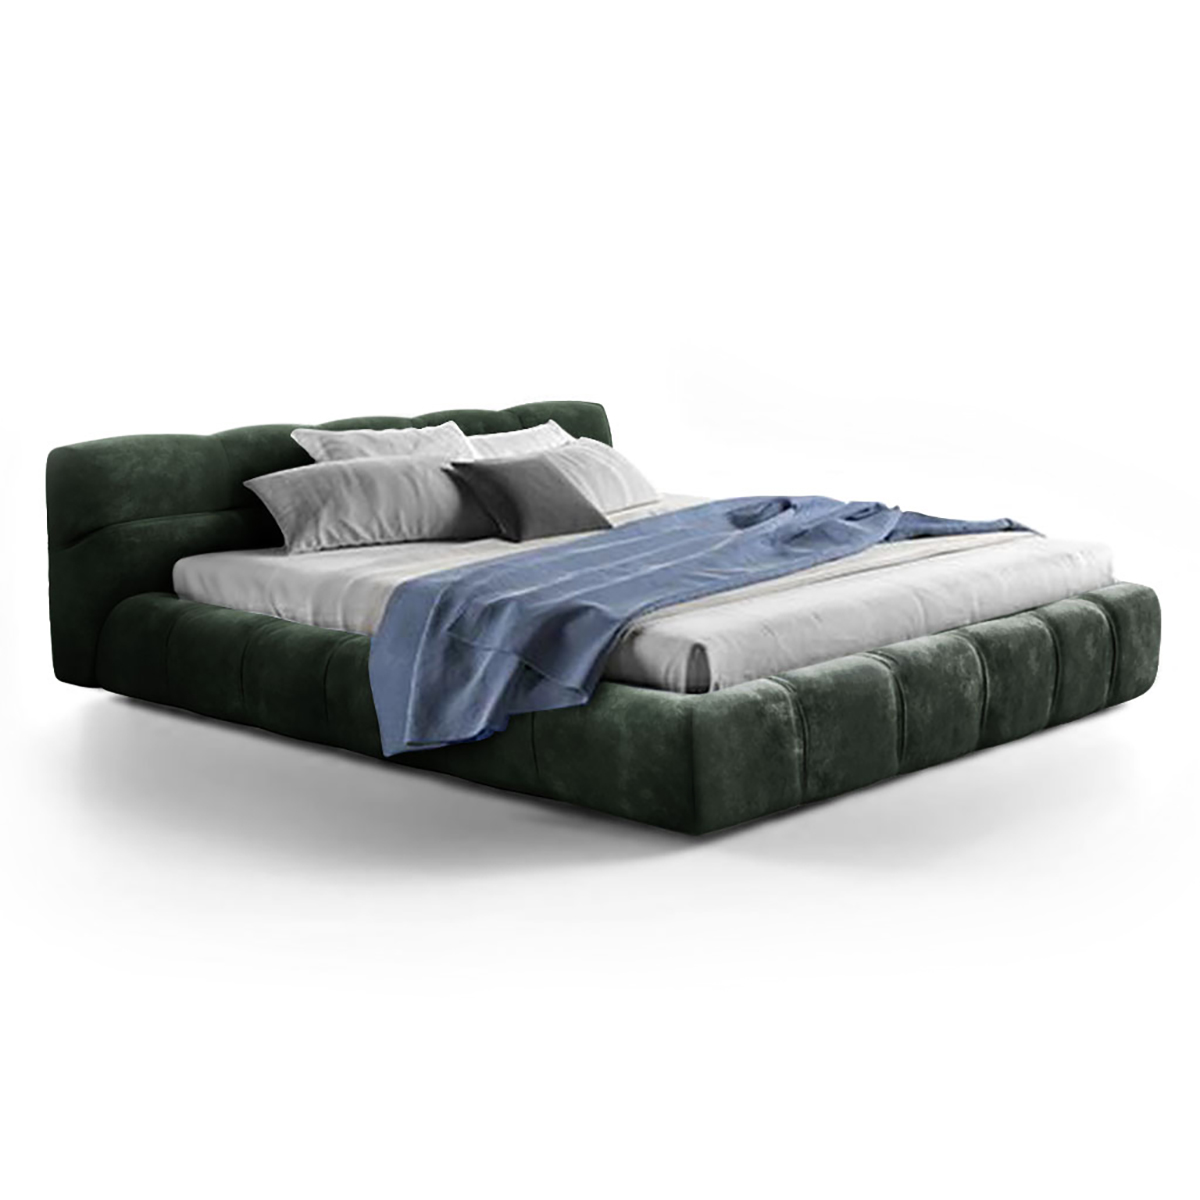 Tufted Bed Chenille Helios-Evergreen / California King Size